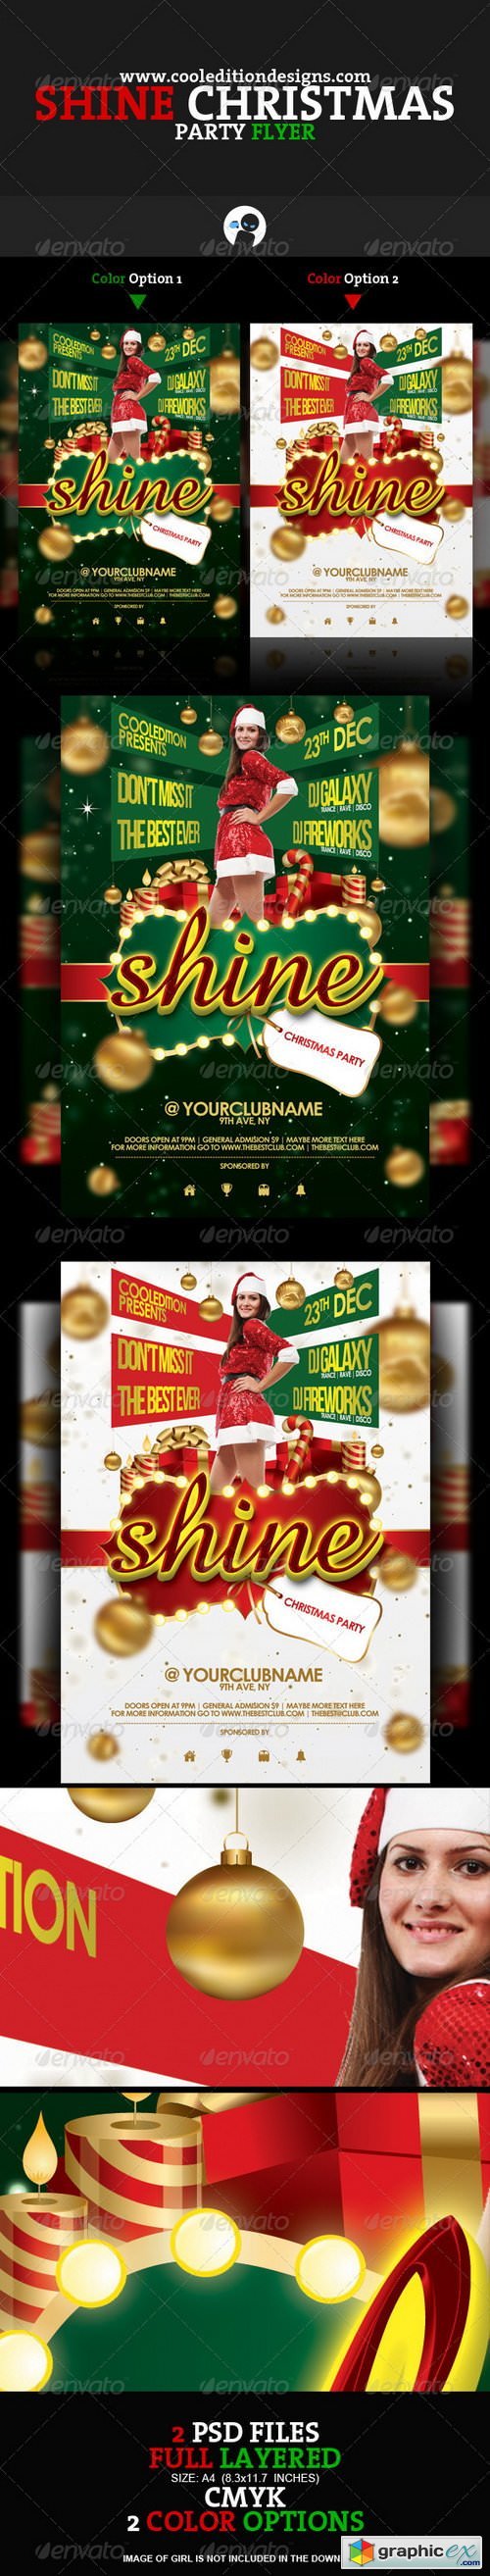 Shine Christmas Party Flyer